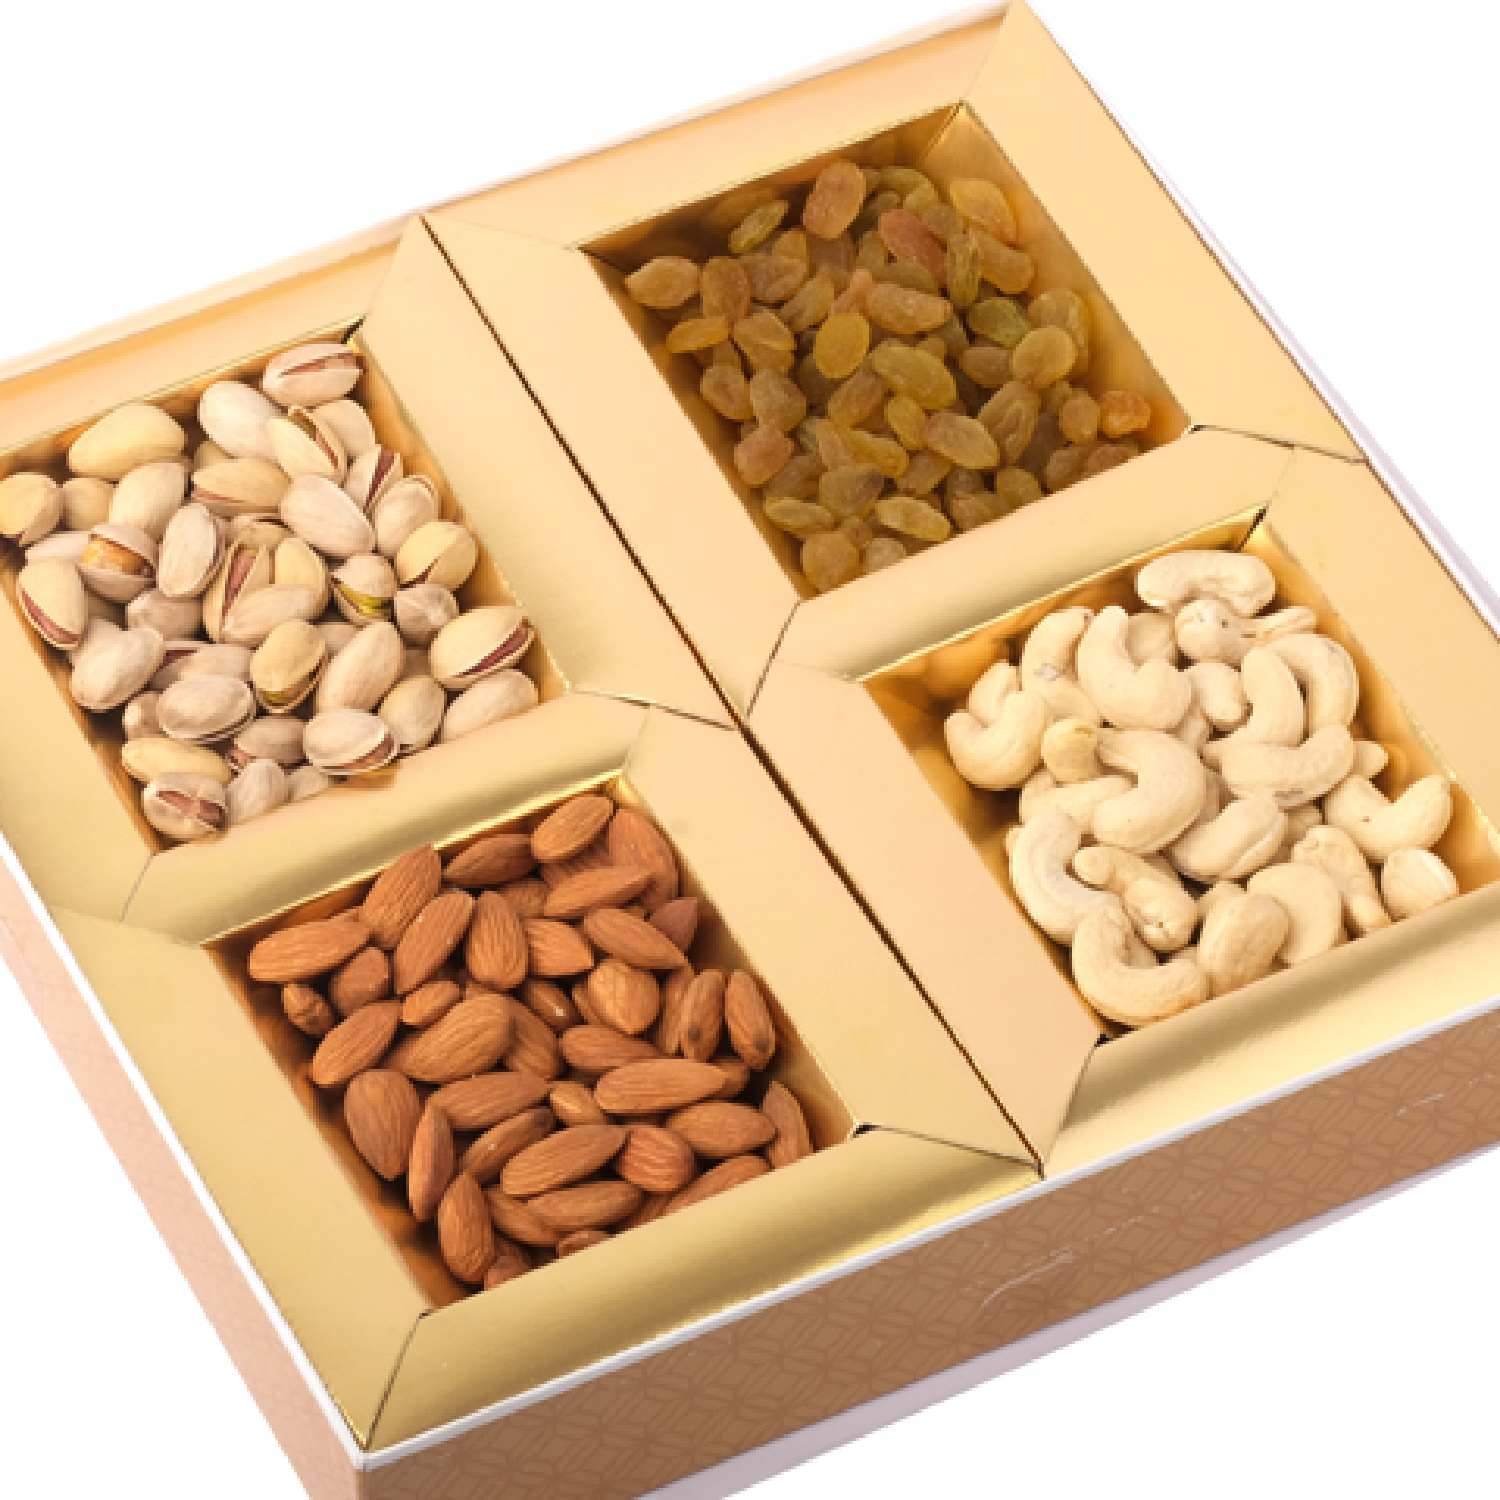 Dry Fruits Gifts Box High Quality Packaging [ international Quality  Packaging [Box] Dry Fruits Weight 400 gm] Four Dry Fruits in a Box